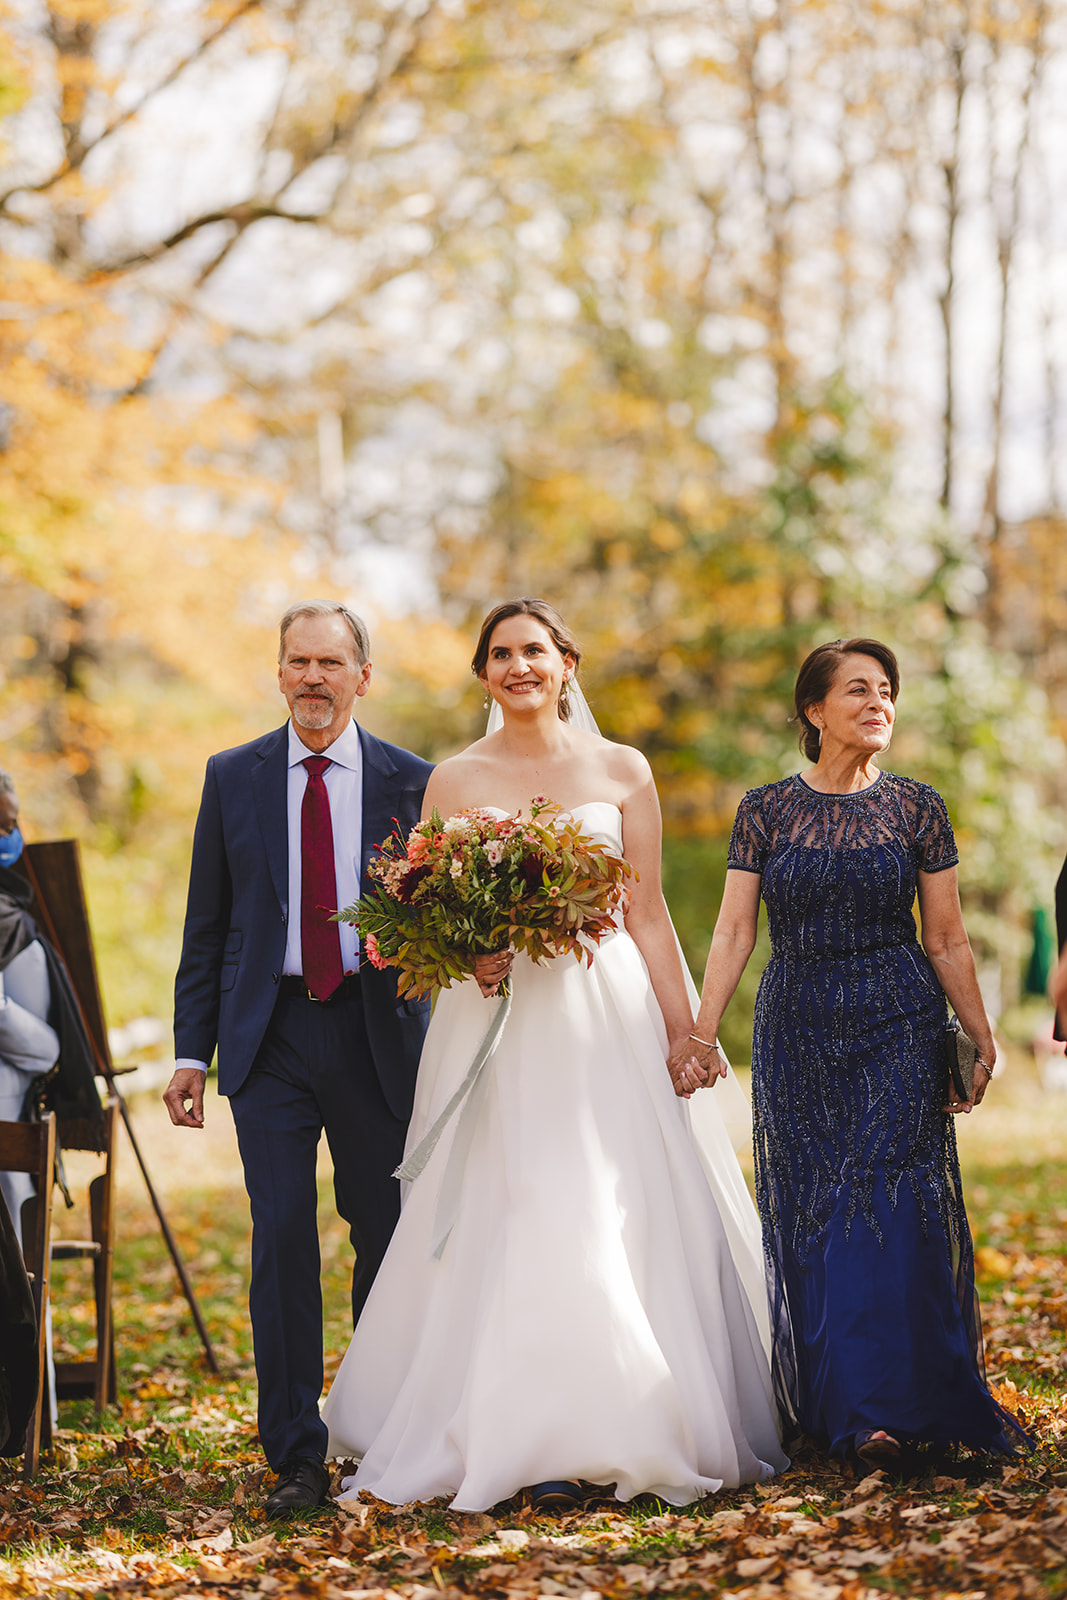 a bride in a white wedding gown is walked down the aisle by her parents at an outdoor wedding in the fall